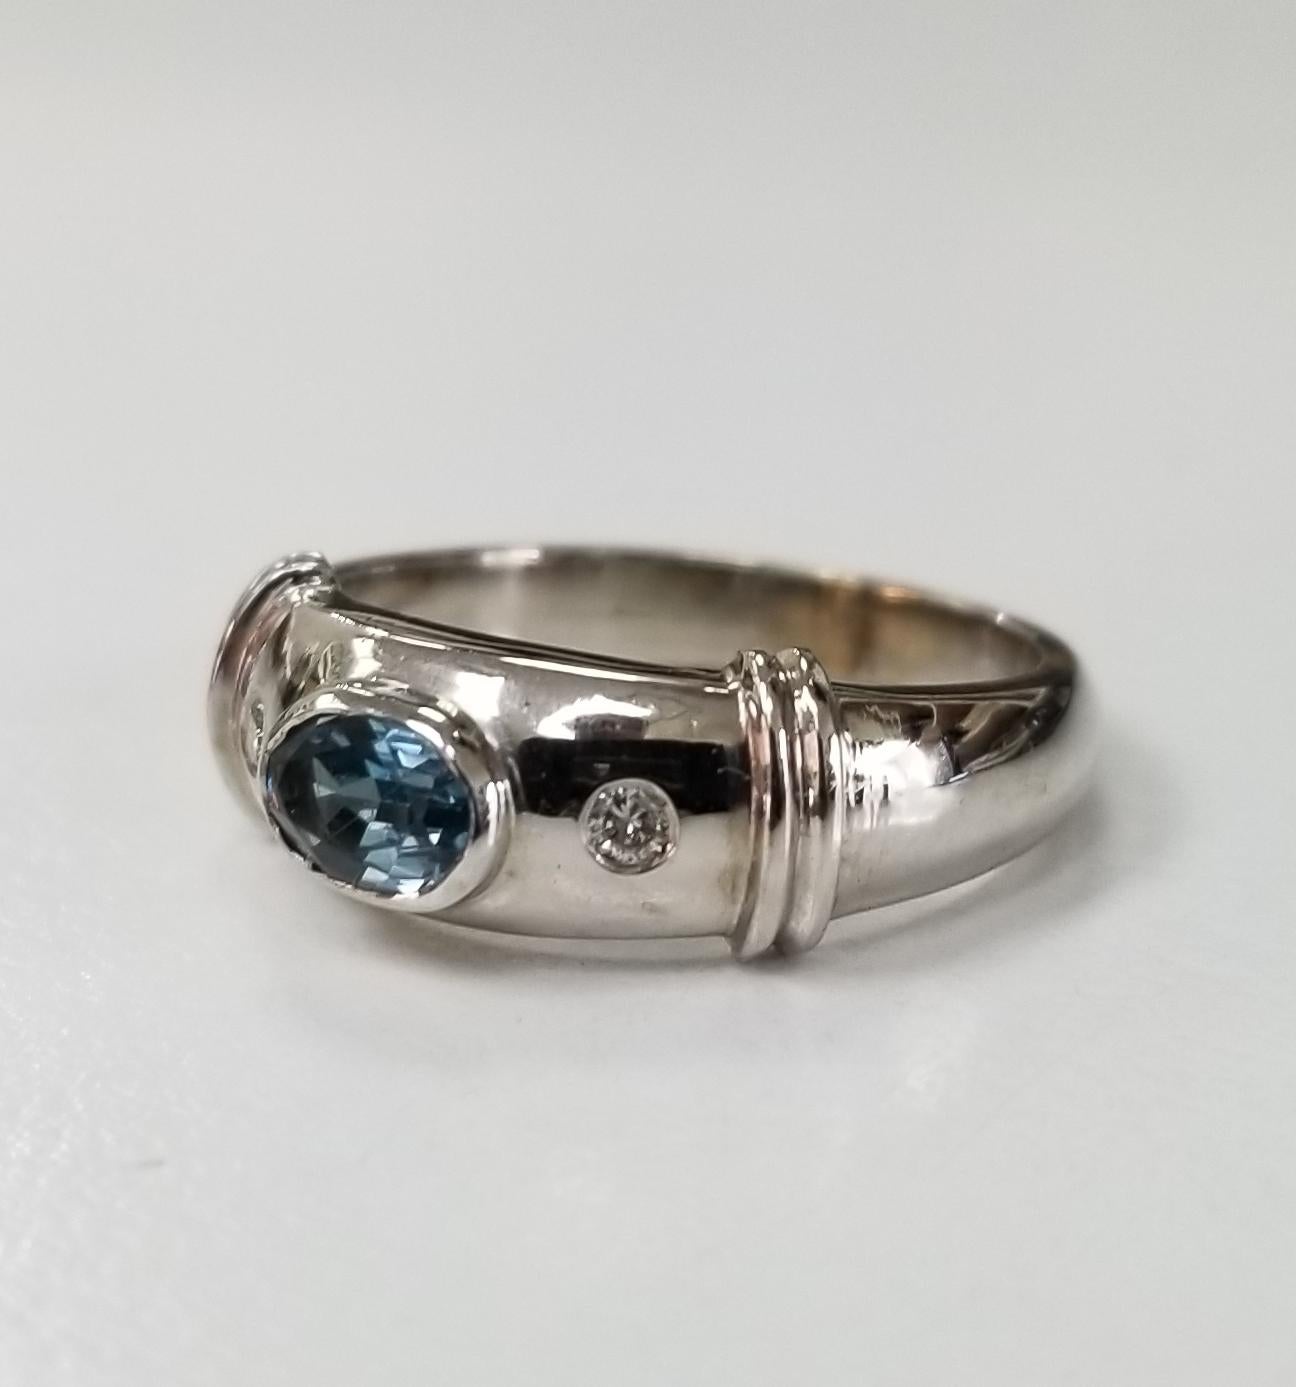 14k white gold Blue Topaz and diamond ring, containing 1 oval blue topaz weighing .55pts. and 2 round diamonds burnished weighing .04pts.  This ring is a size 5.5 but we will size to fit for free.
